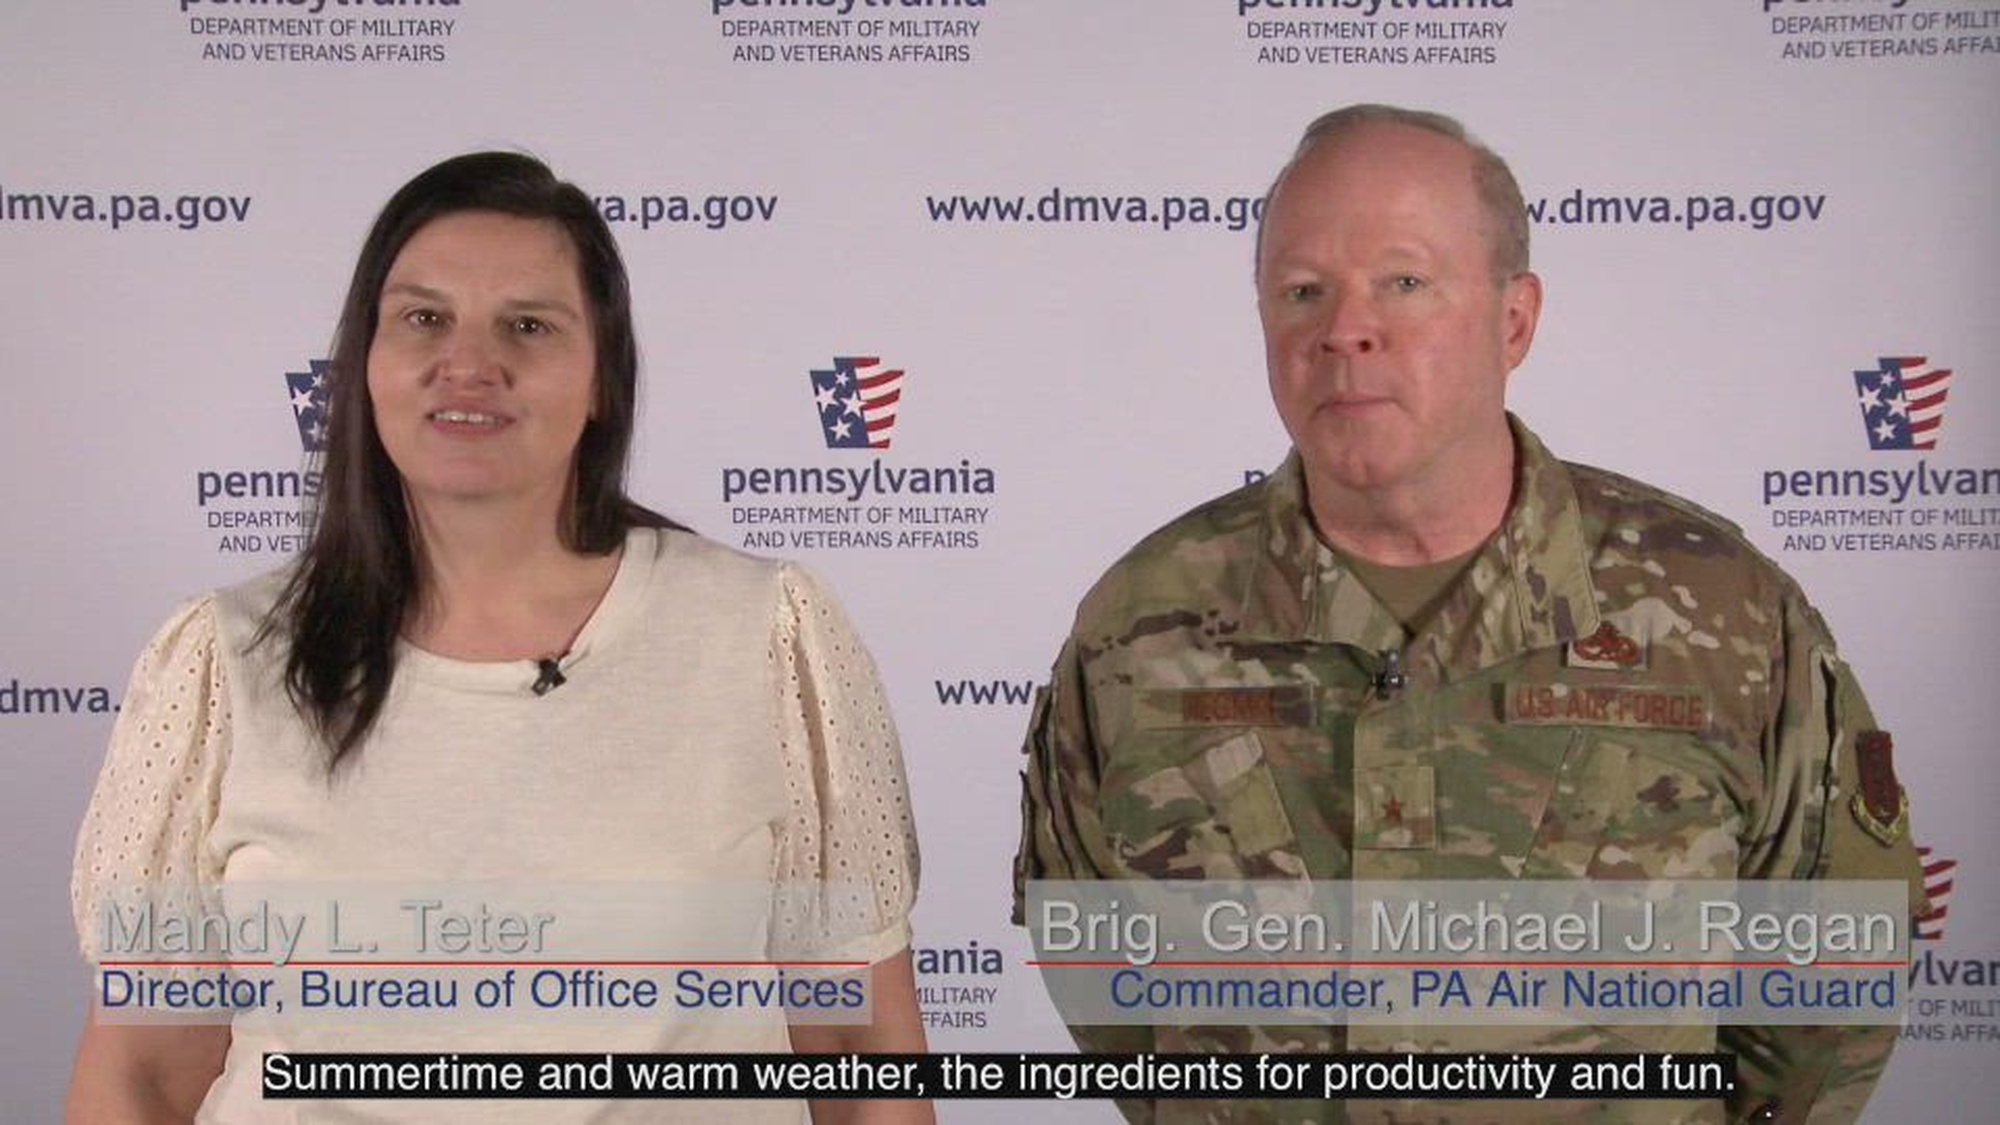 The Pennsylvania Department of Military and Veterans Affairs Summer safety video. (Video by Tom Cherry)